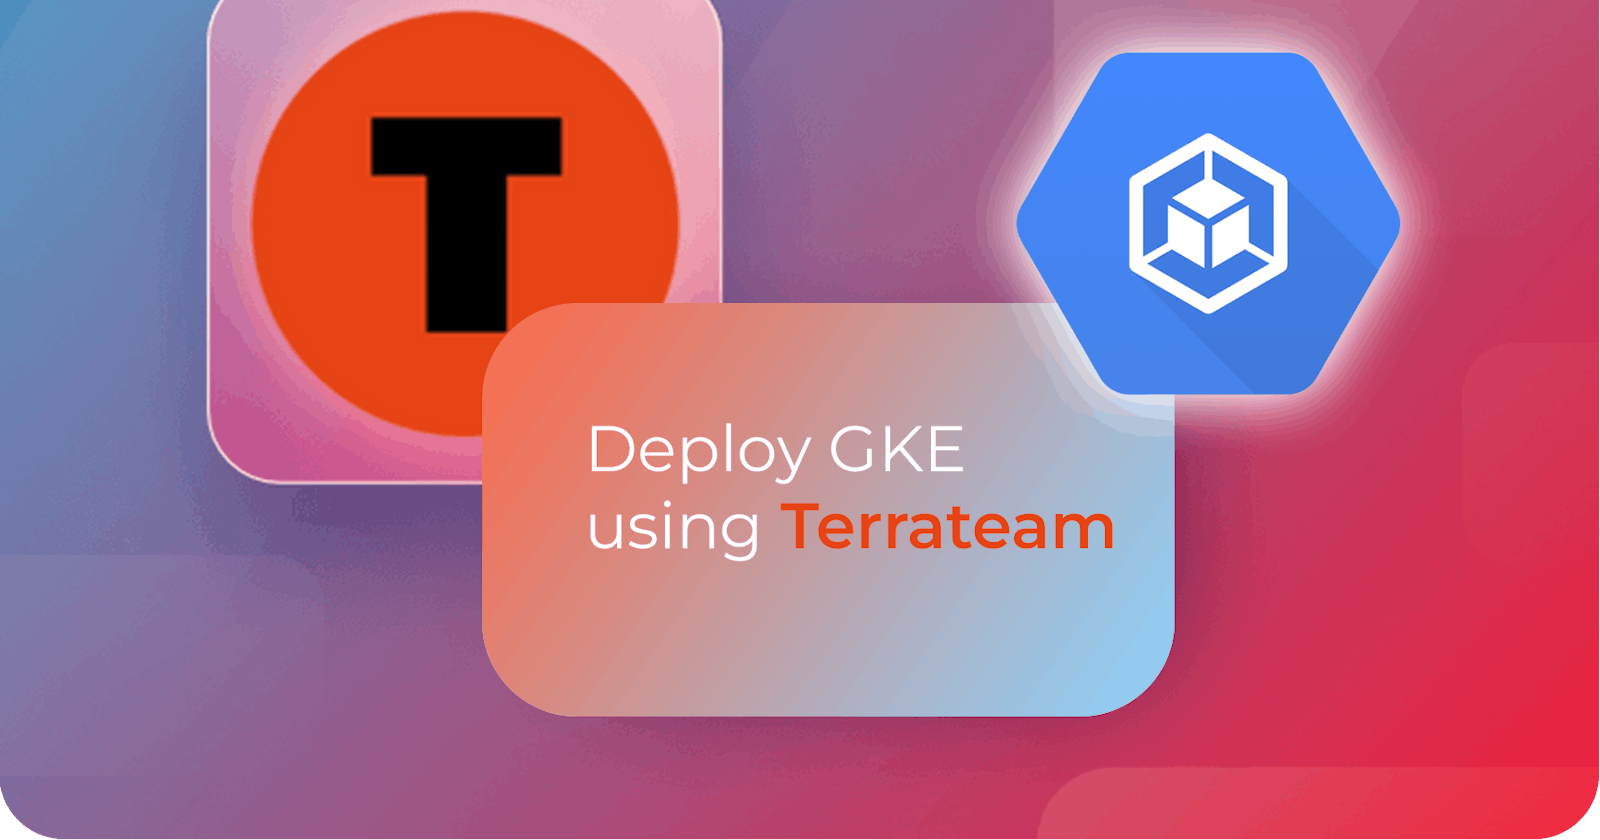 Deploying GKE With Terrateam